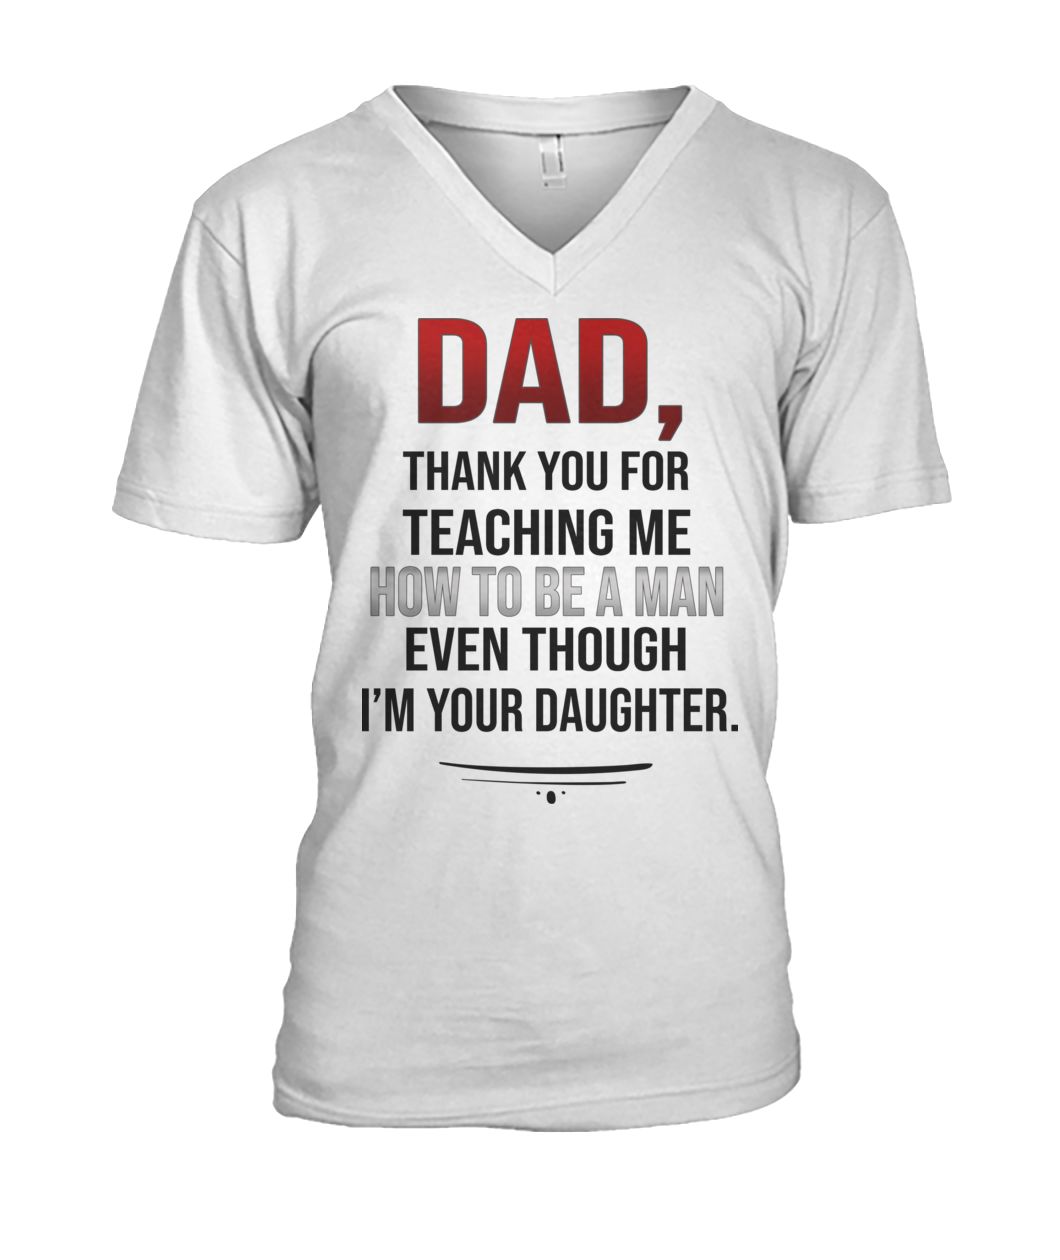 Dad thank you for teaching me how to be a man even though I'm your daughter mens v-neck